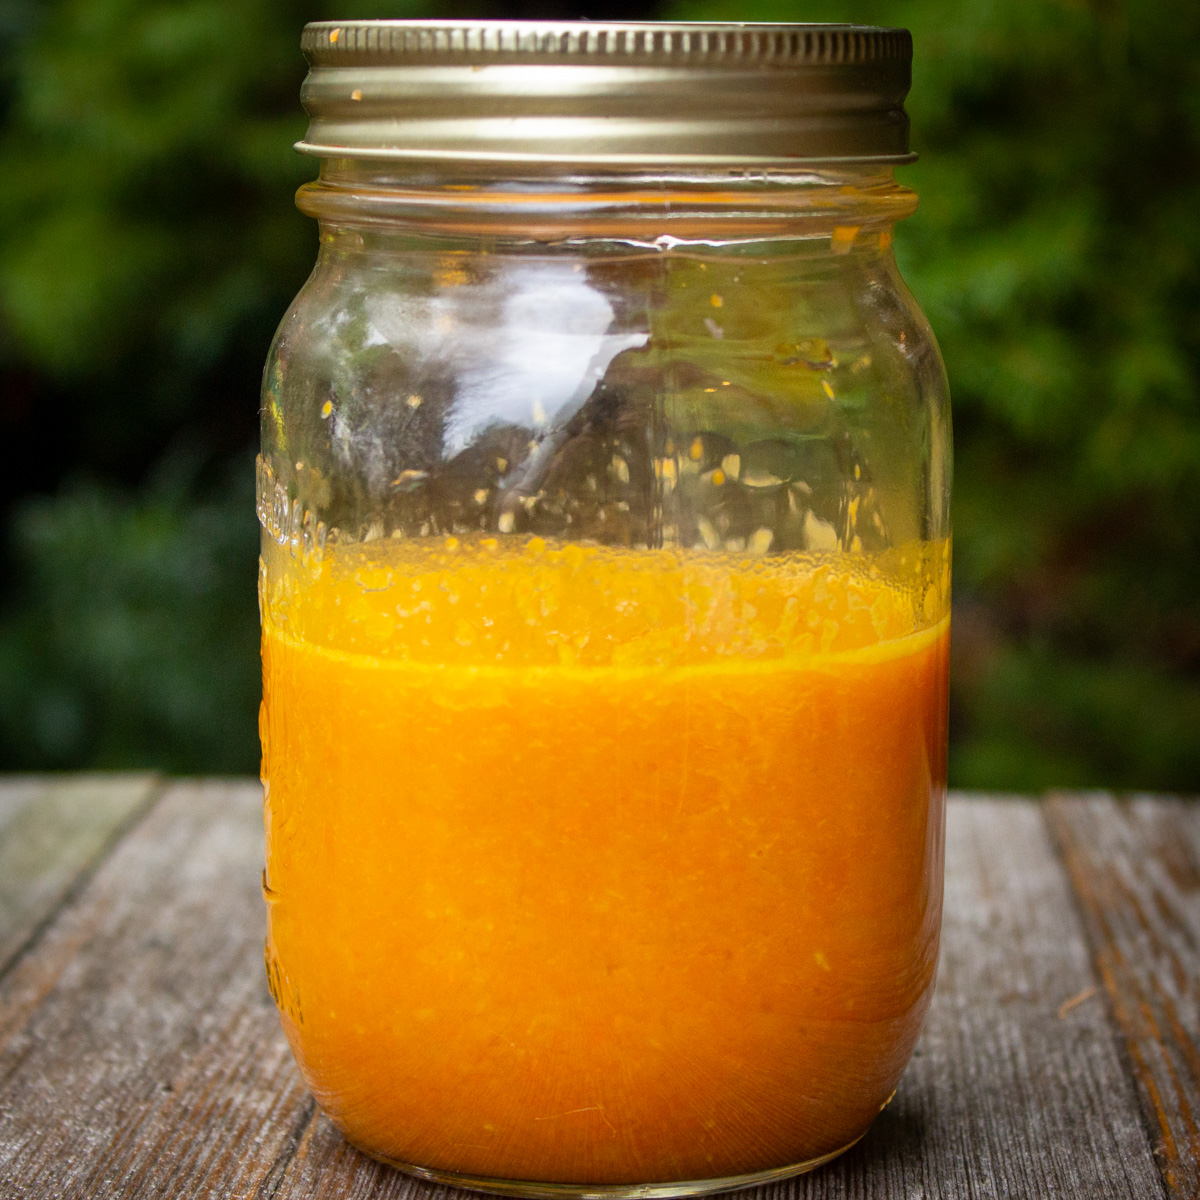 Japanese Ginger Dressing With Carrots (5 Minutes)